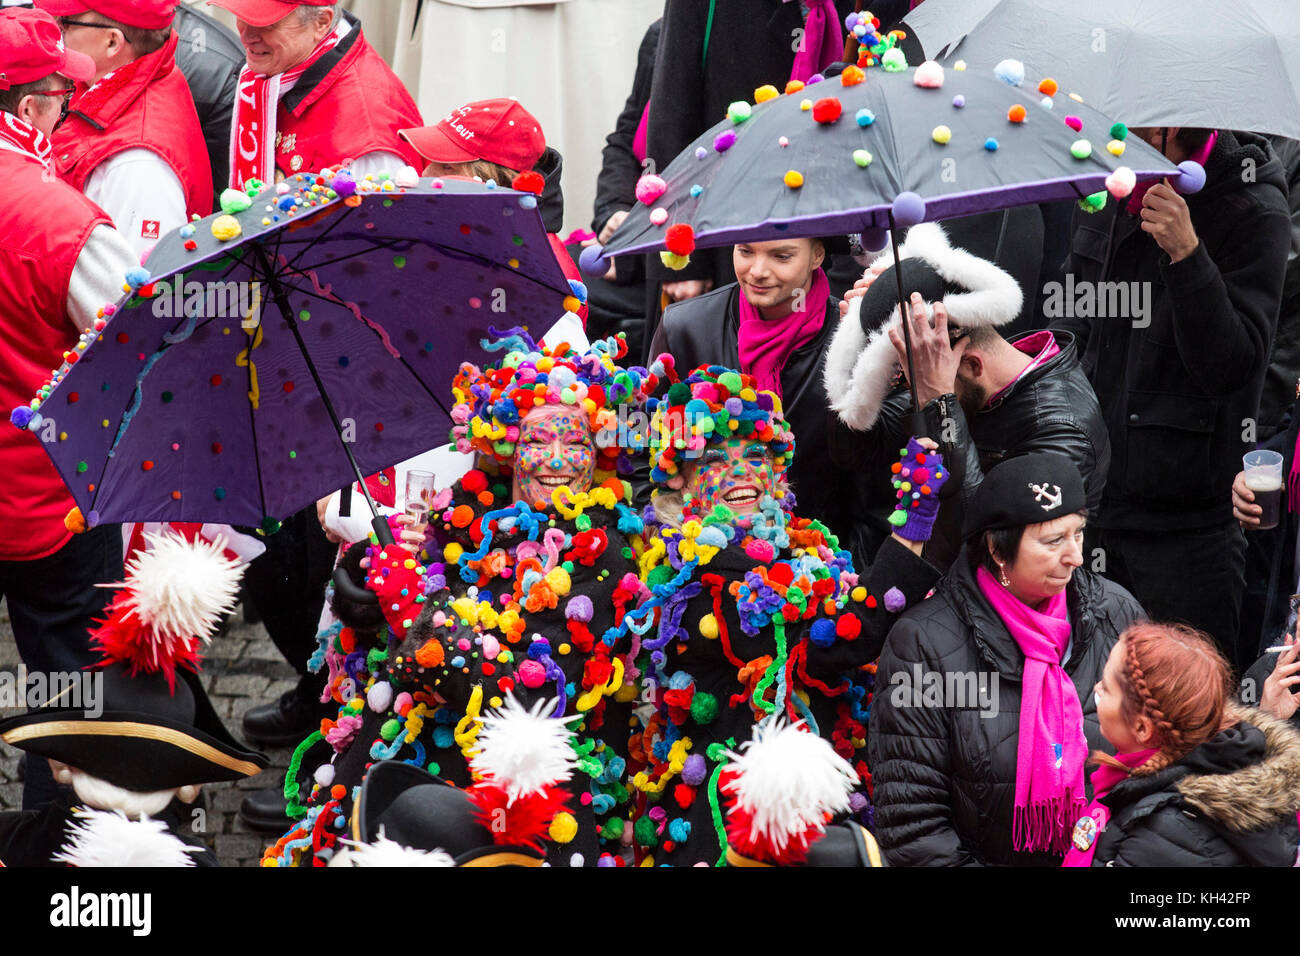 Colourful costumes on display. The German Carnival season traditionally begins with the Hoppeditz Erwachen event on 11 November, Düsseldorf, Germany, and runs to Ash Wednesday the following year. Stock Photo